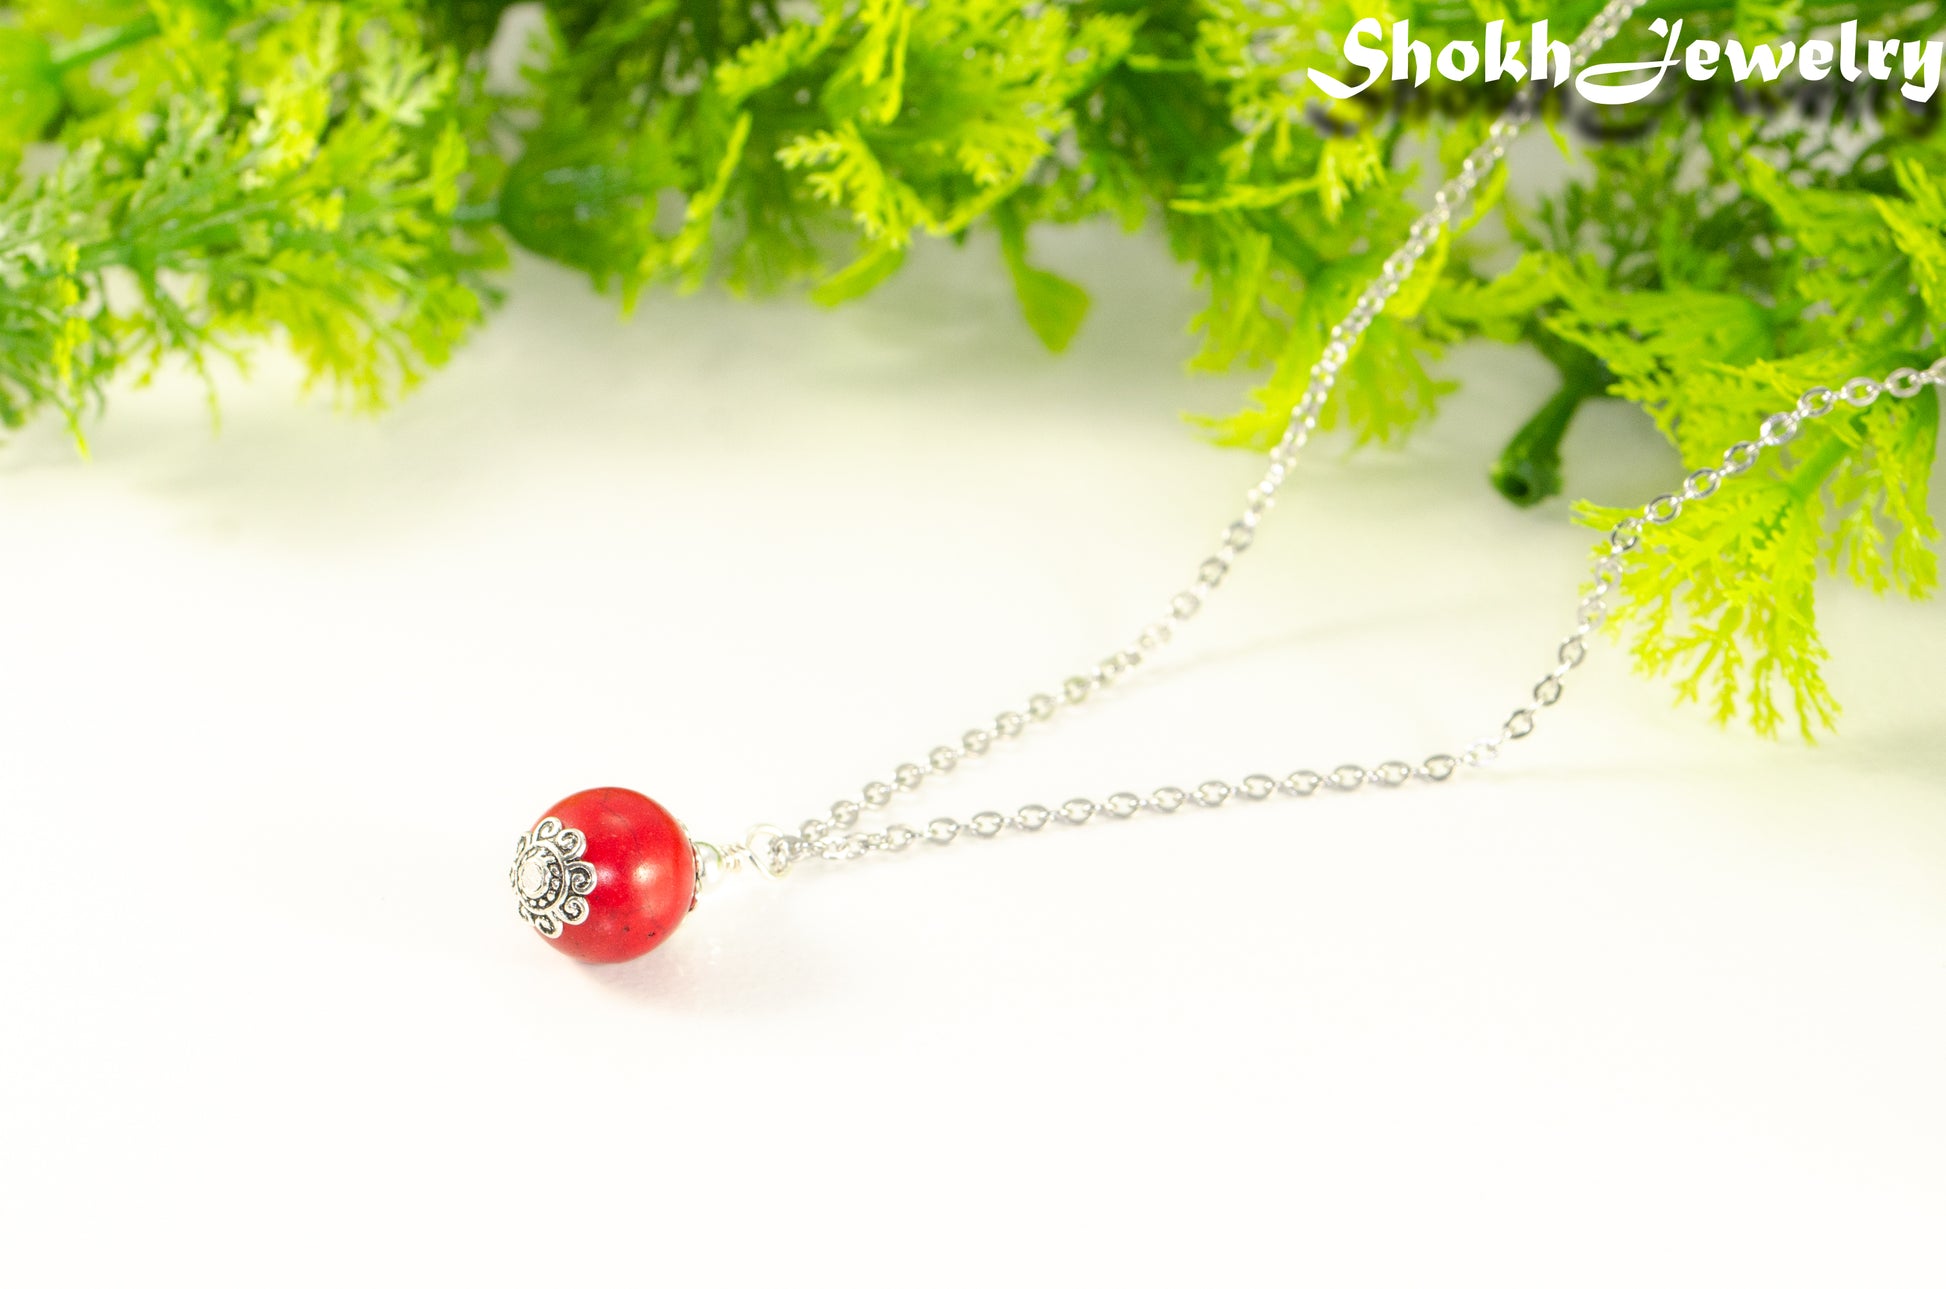 12mm Red Howlite Pendant Necklace.